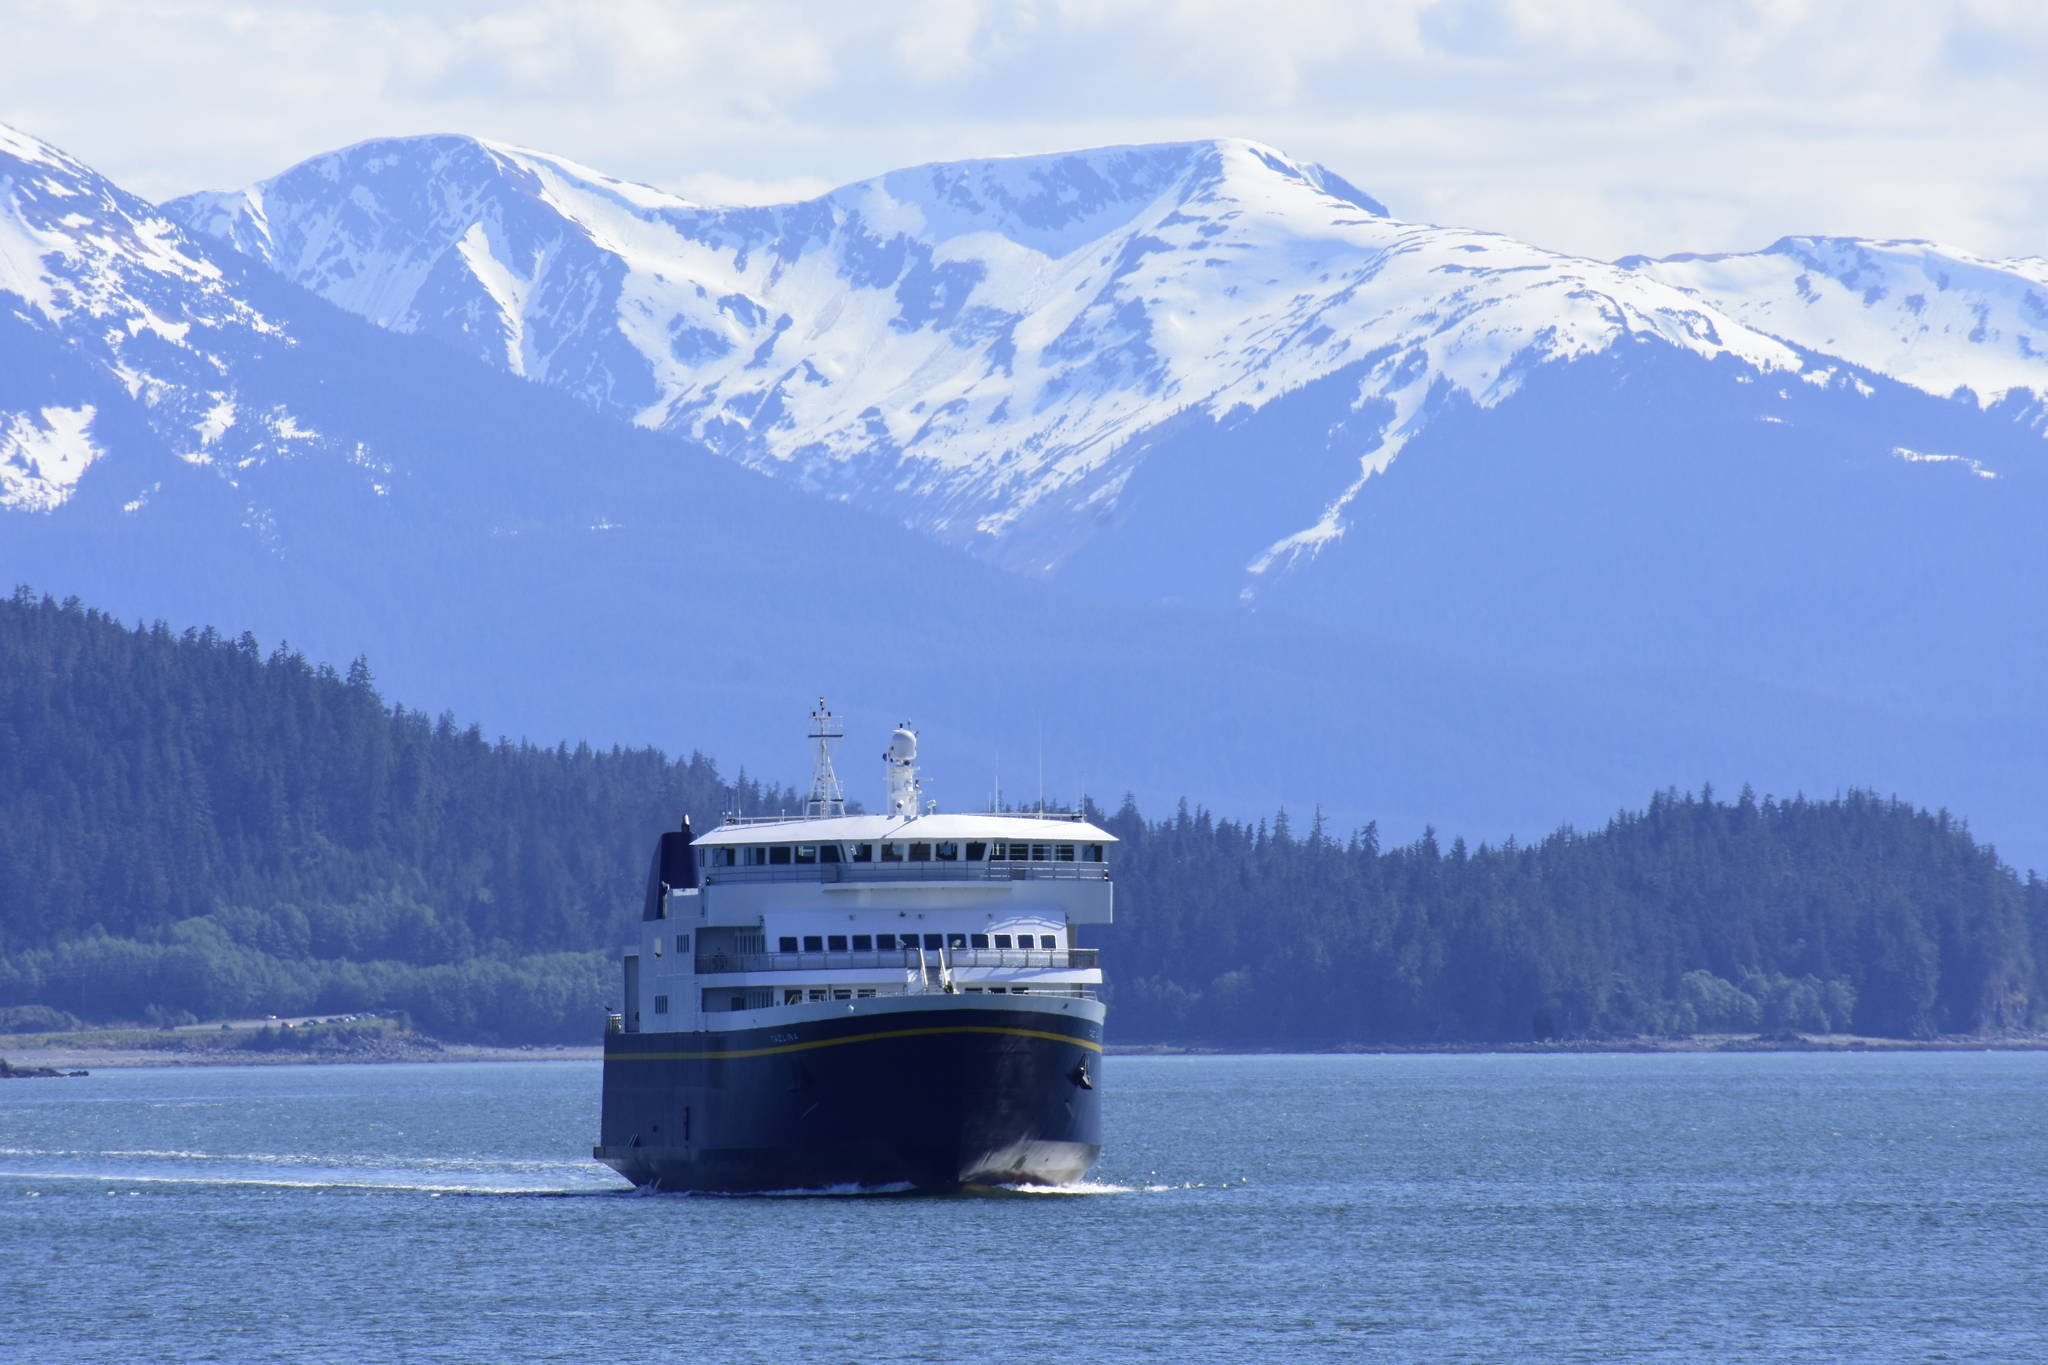 The Alaska State Legislature passed a bill to create a new oversight board for the Alaska Marine Highway System and its ships like the Tazlina, seen here coming into dock at Juneau on May 16, 2020. (Peter Segall / Juneau Empire)